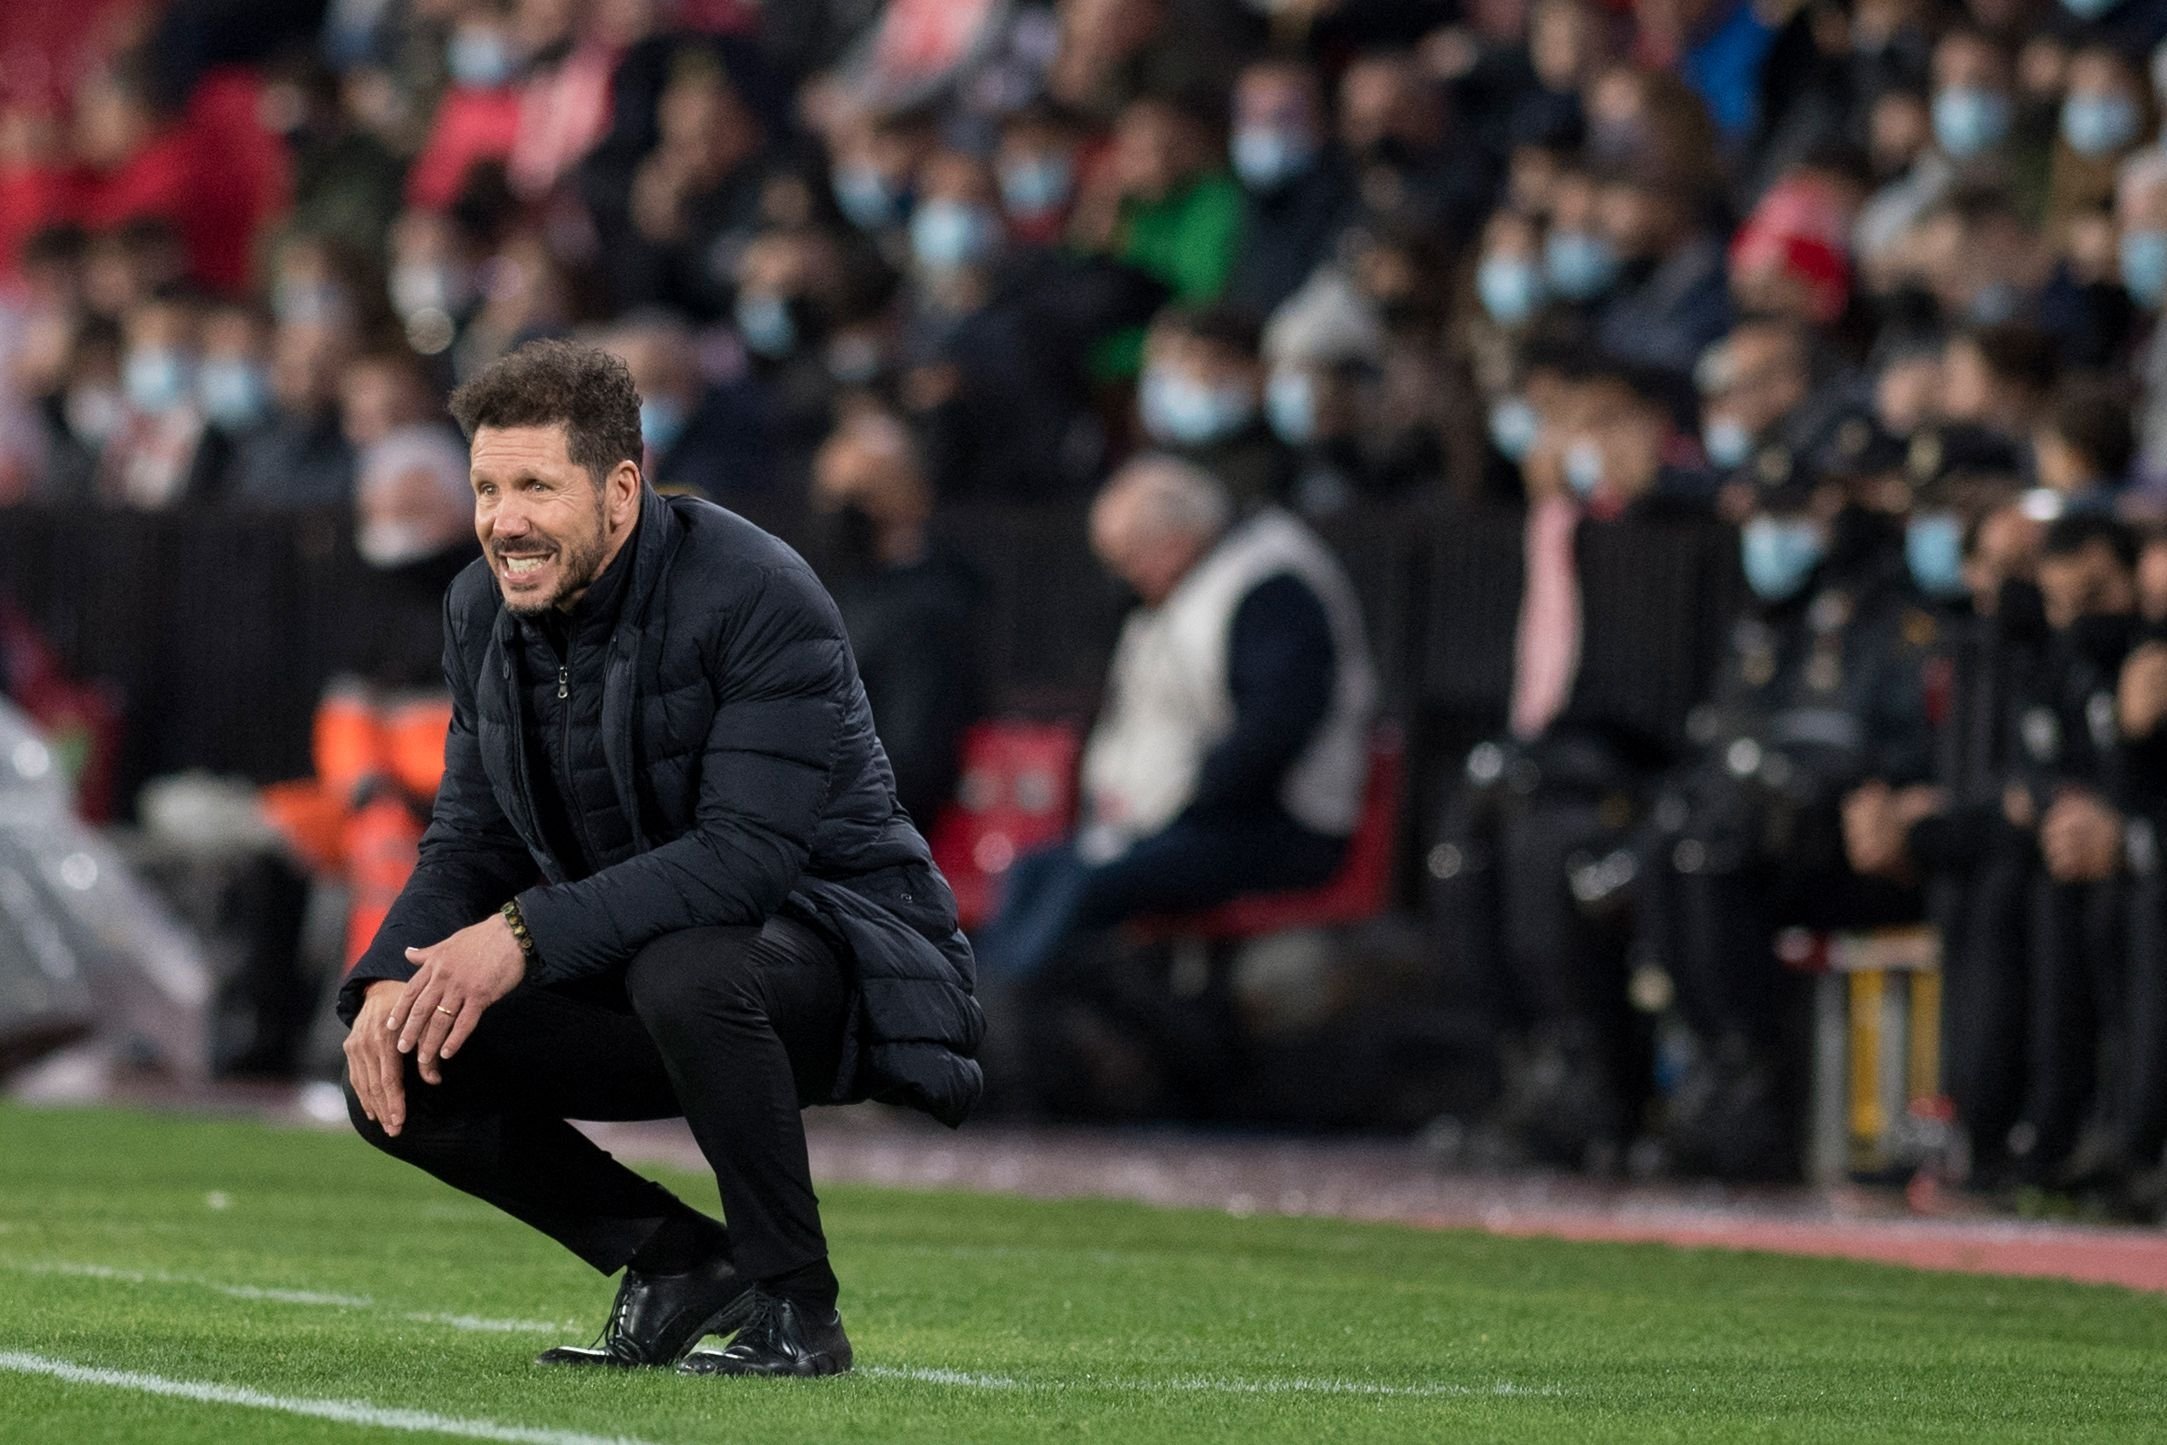 Atletico coach Diego Simeone, 4 others test COVID-19 positive | Daily Sabah